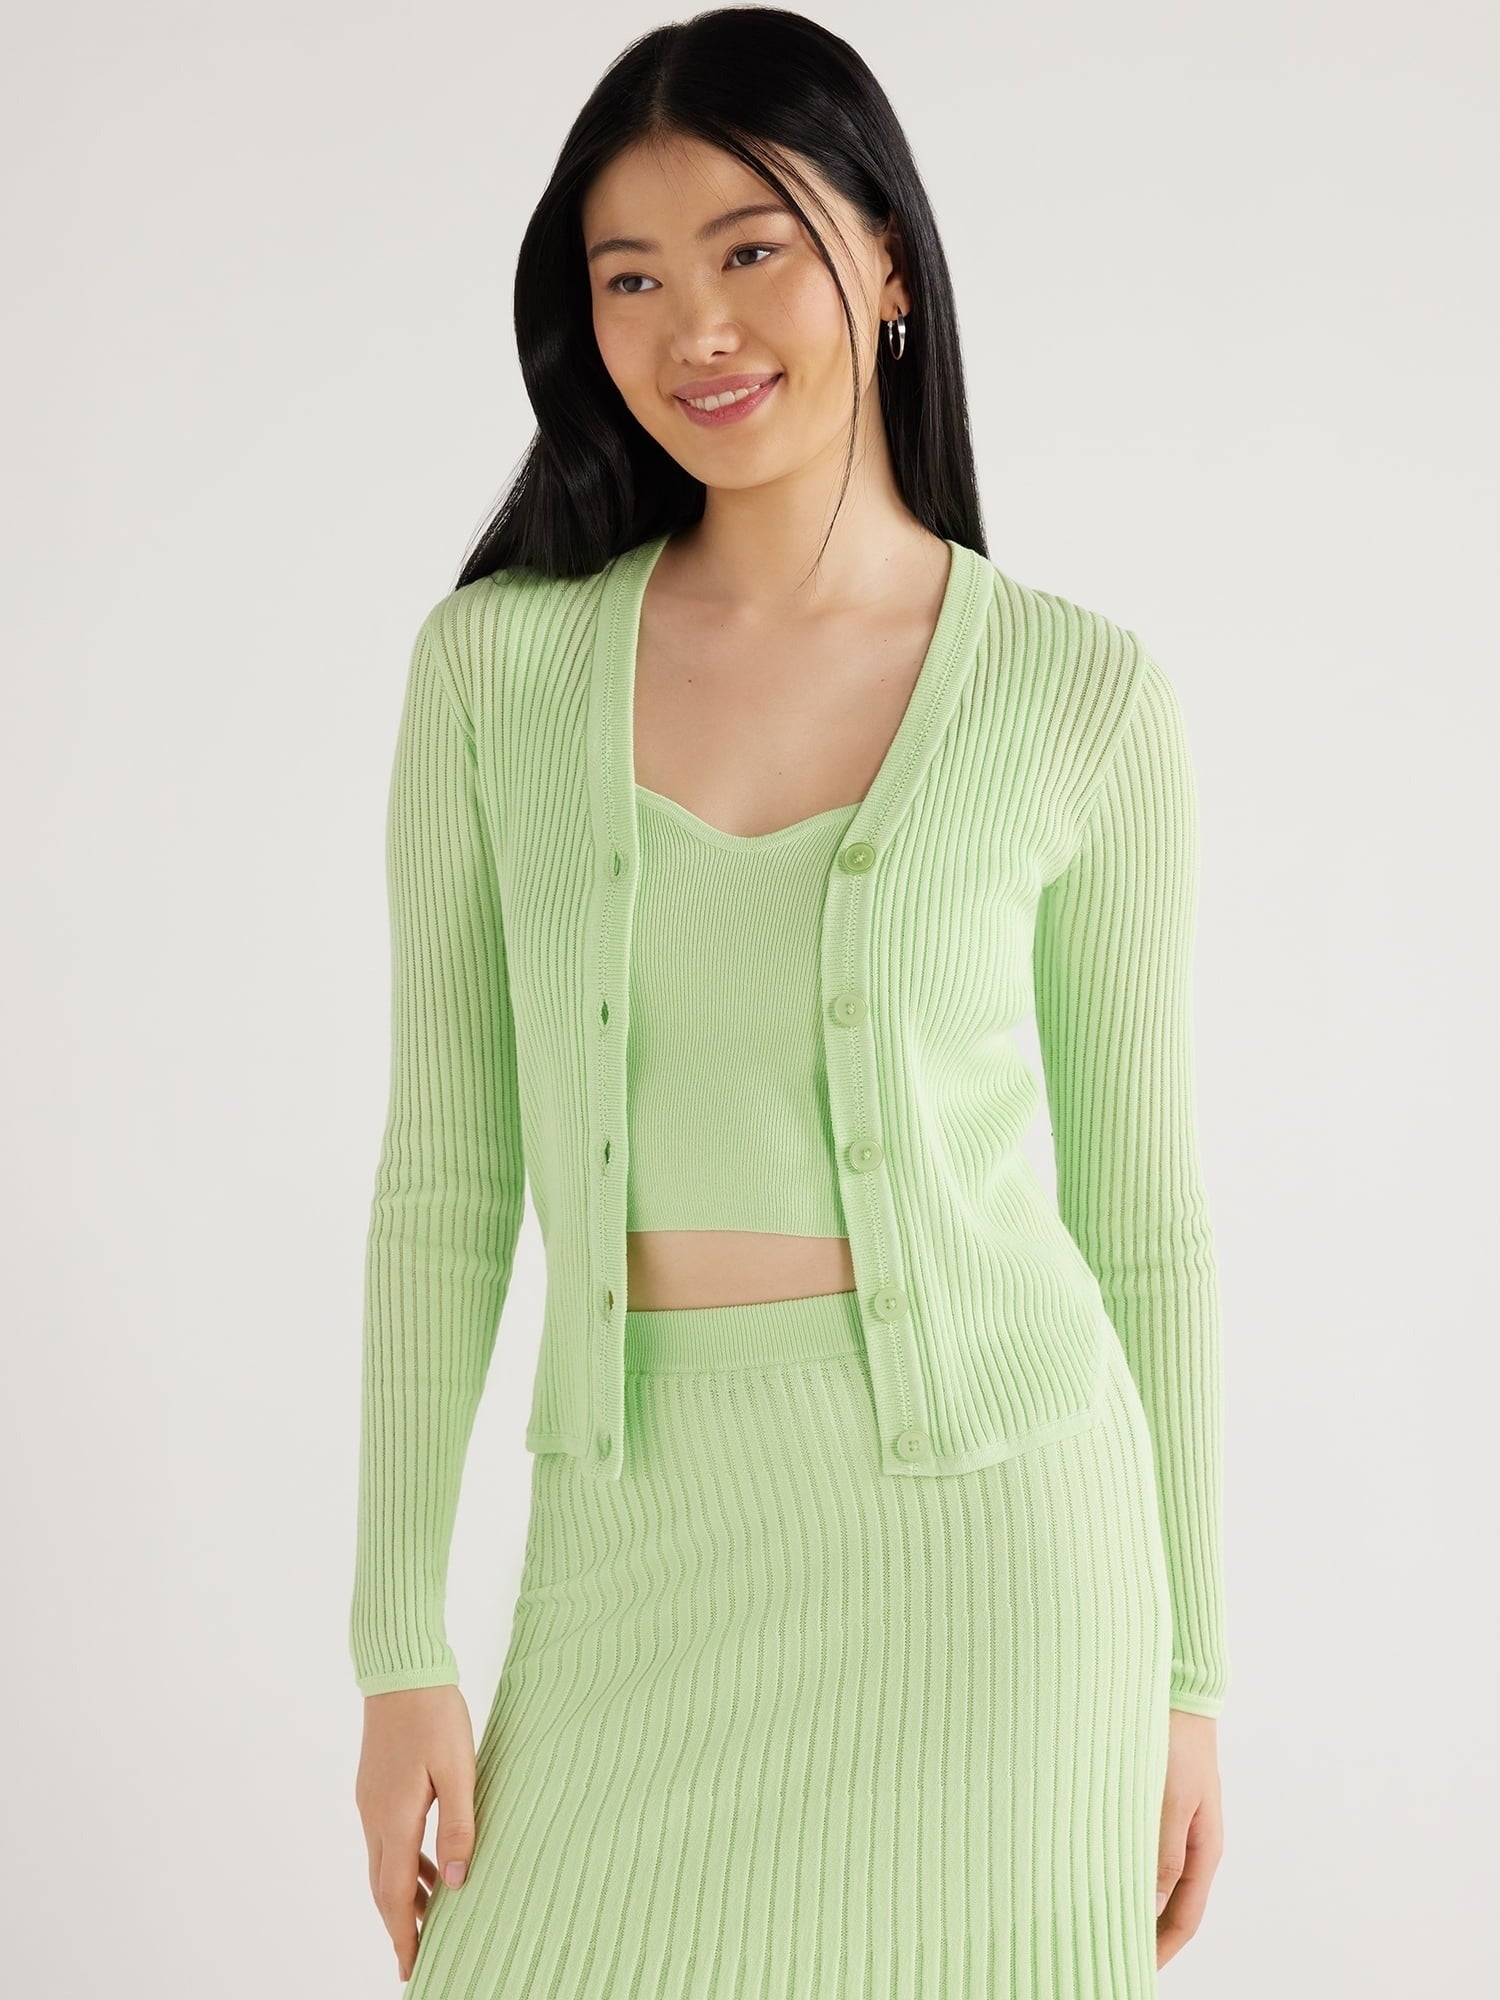 model in a matching ribbed green cardigan, bralette and skirt set